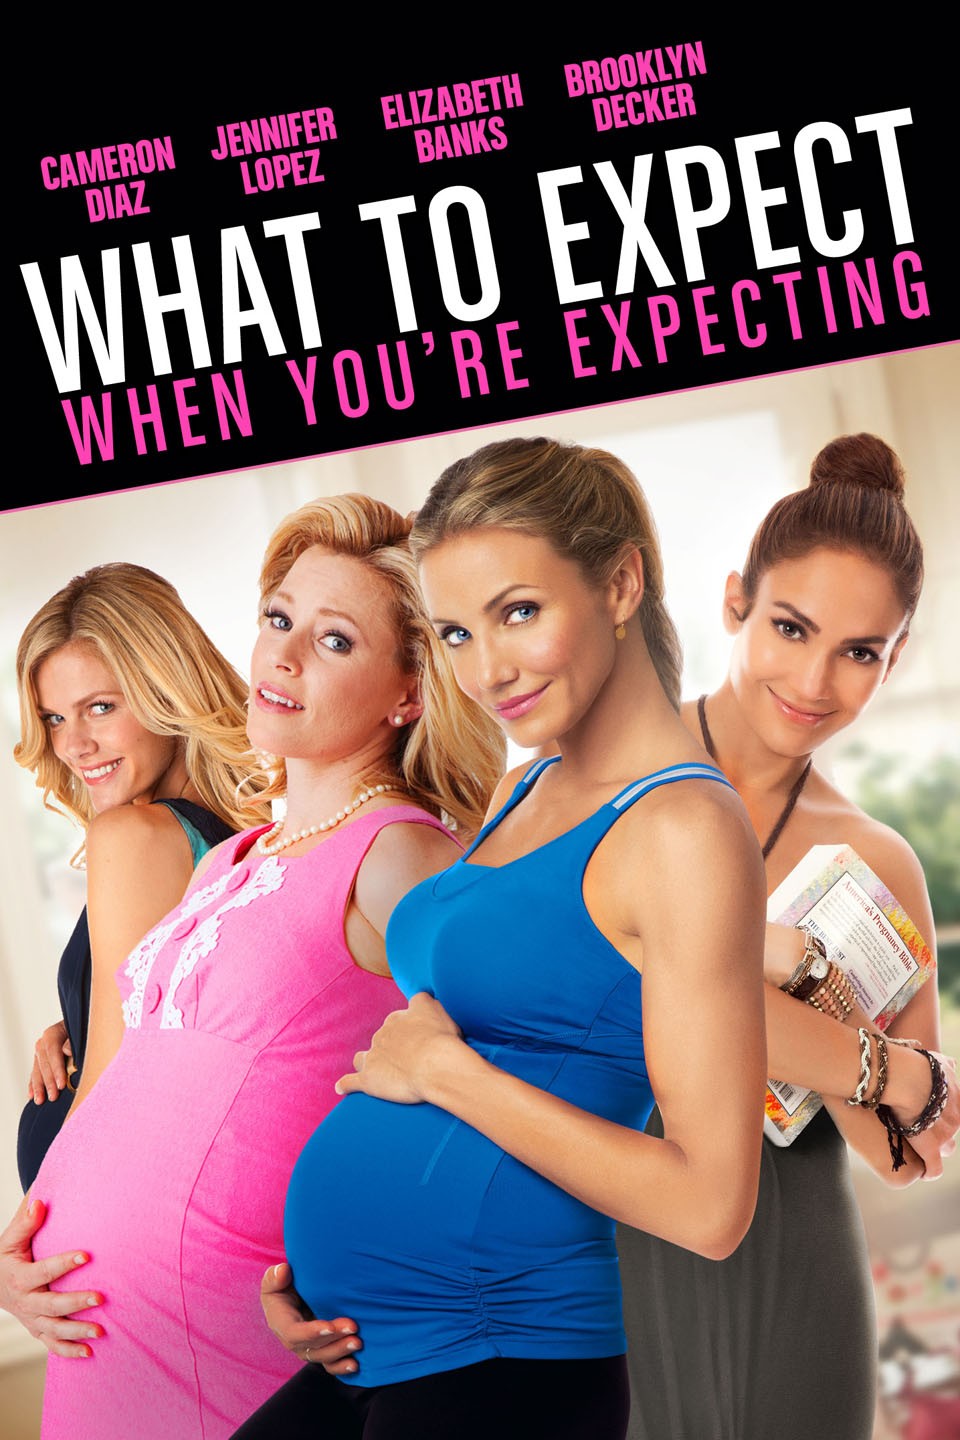 What to Expect When You're Expecting - Wikipedia, la enciclopedia libre